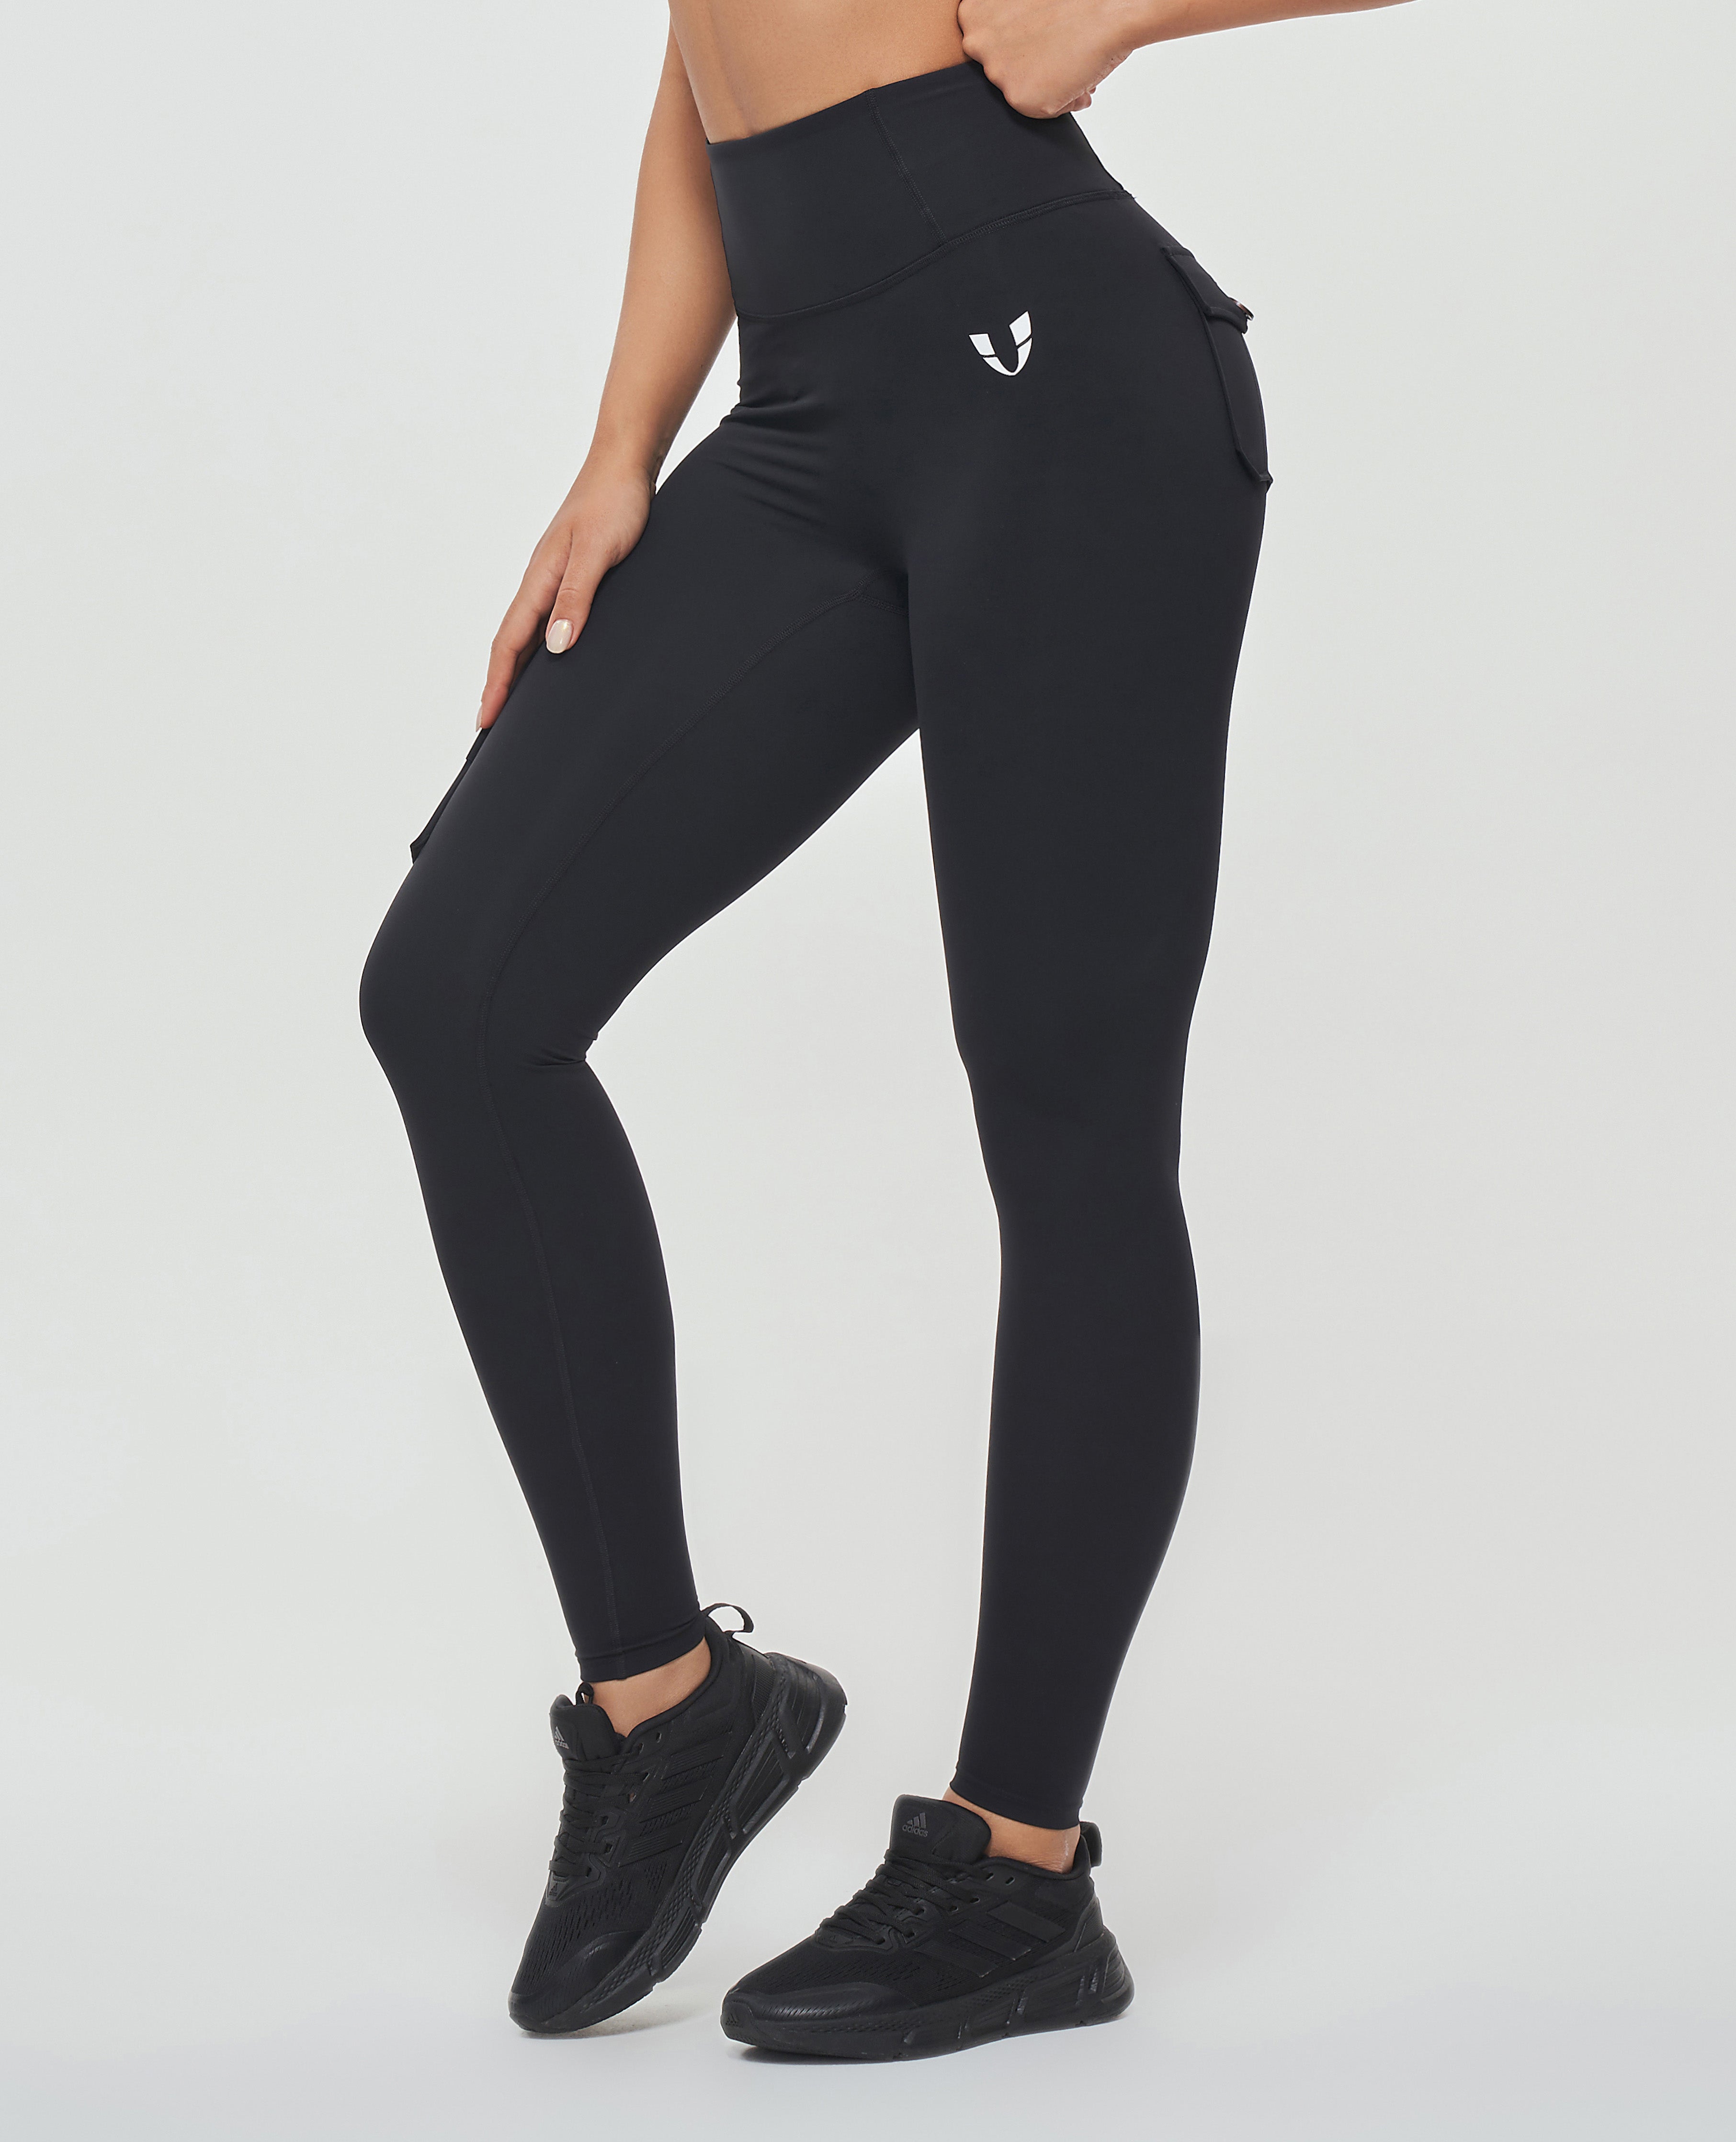 Solo cargo leggings are made from a high-performance fabric that